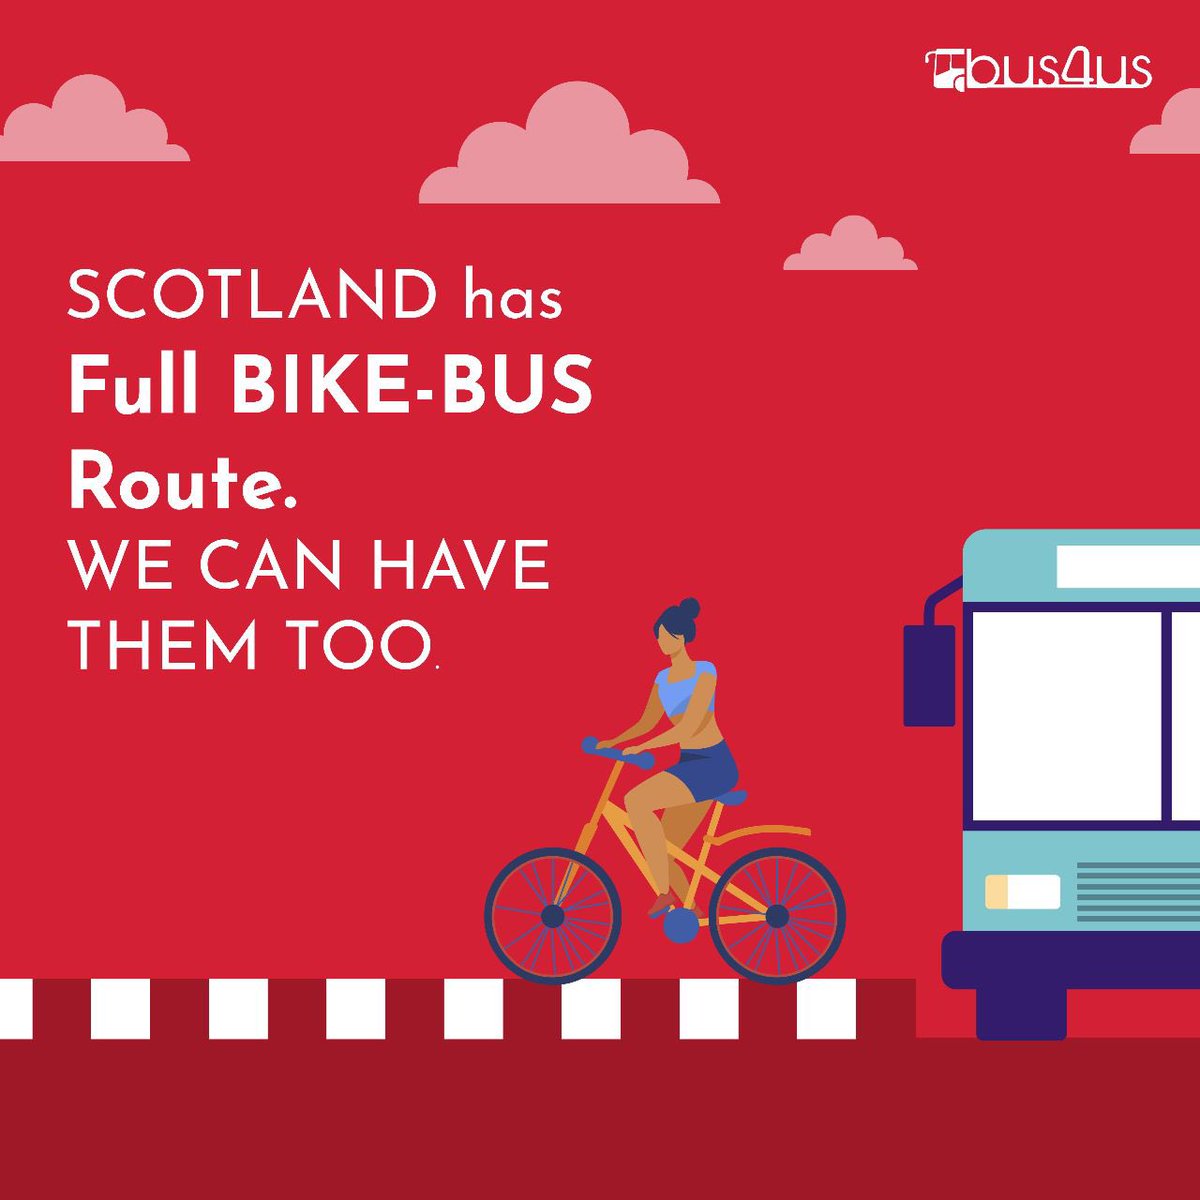 Ofcourse we need many more buses and bus priority lanes, but if we had cyclist friendly buses, won't that improve our 1st / last mile connectivity as proven in many cities of the world? 
Let us know what you think in the comments below.
#bus4us_blr #bus4usisgood4us